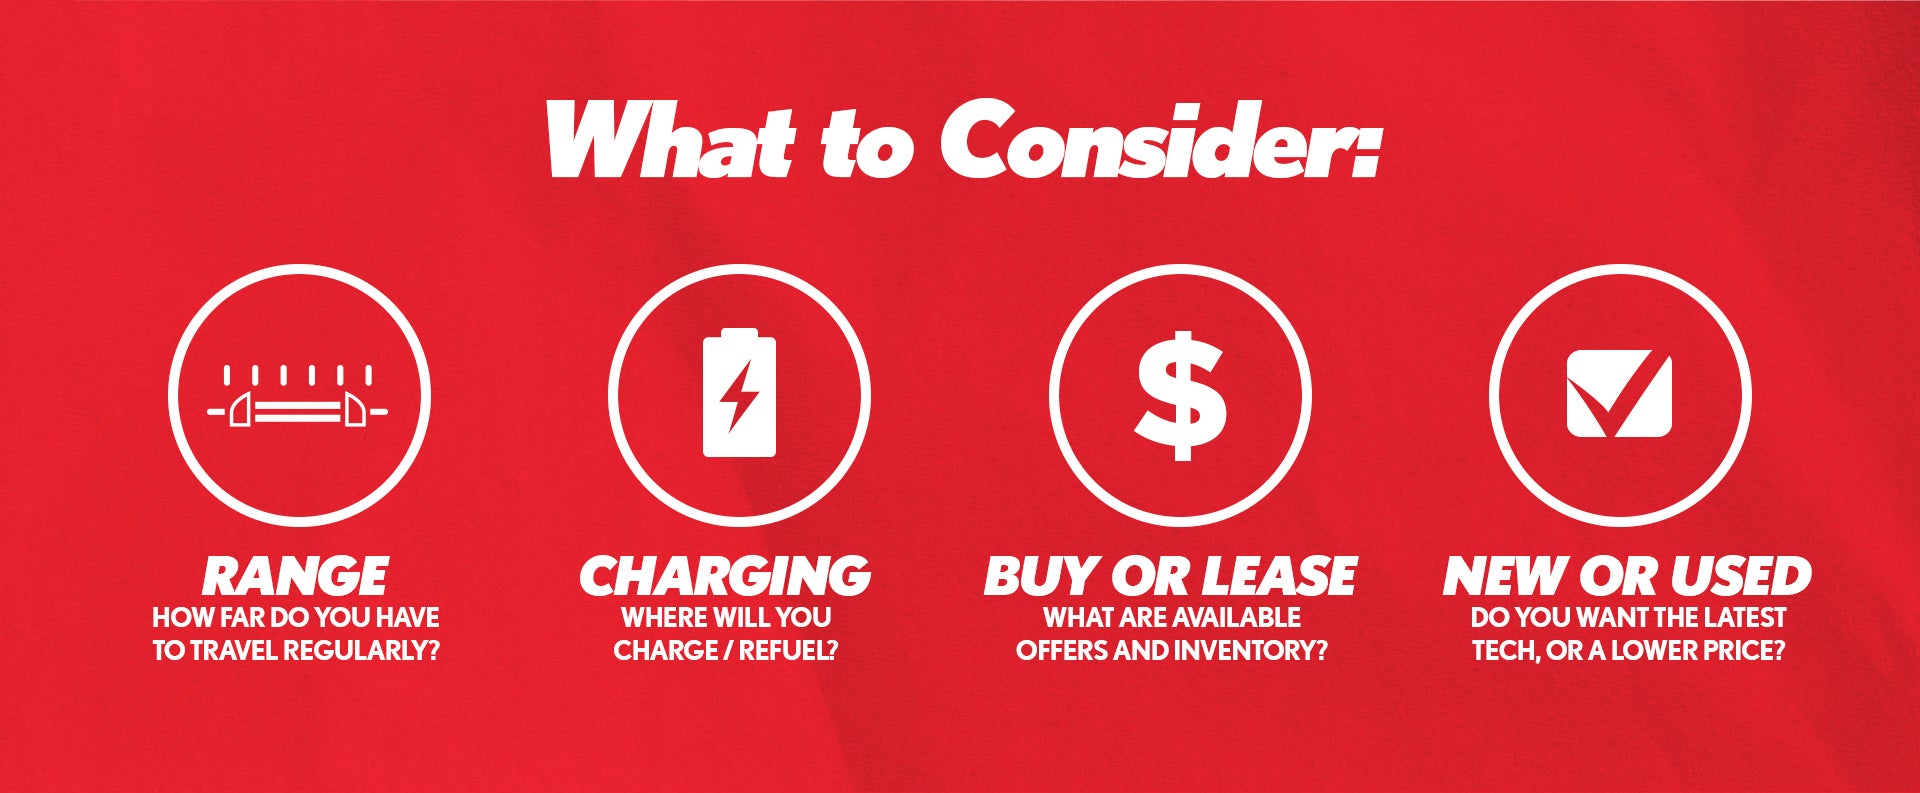 What to Consider: Range, Charging, Buy/Lease, New/Used